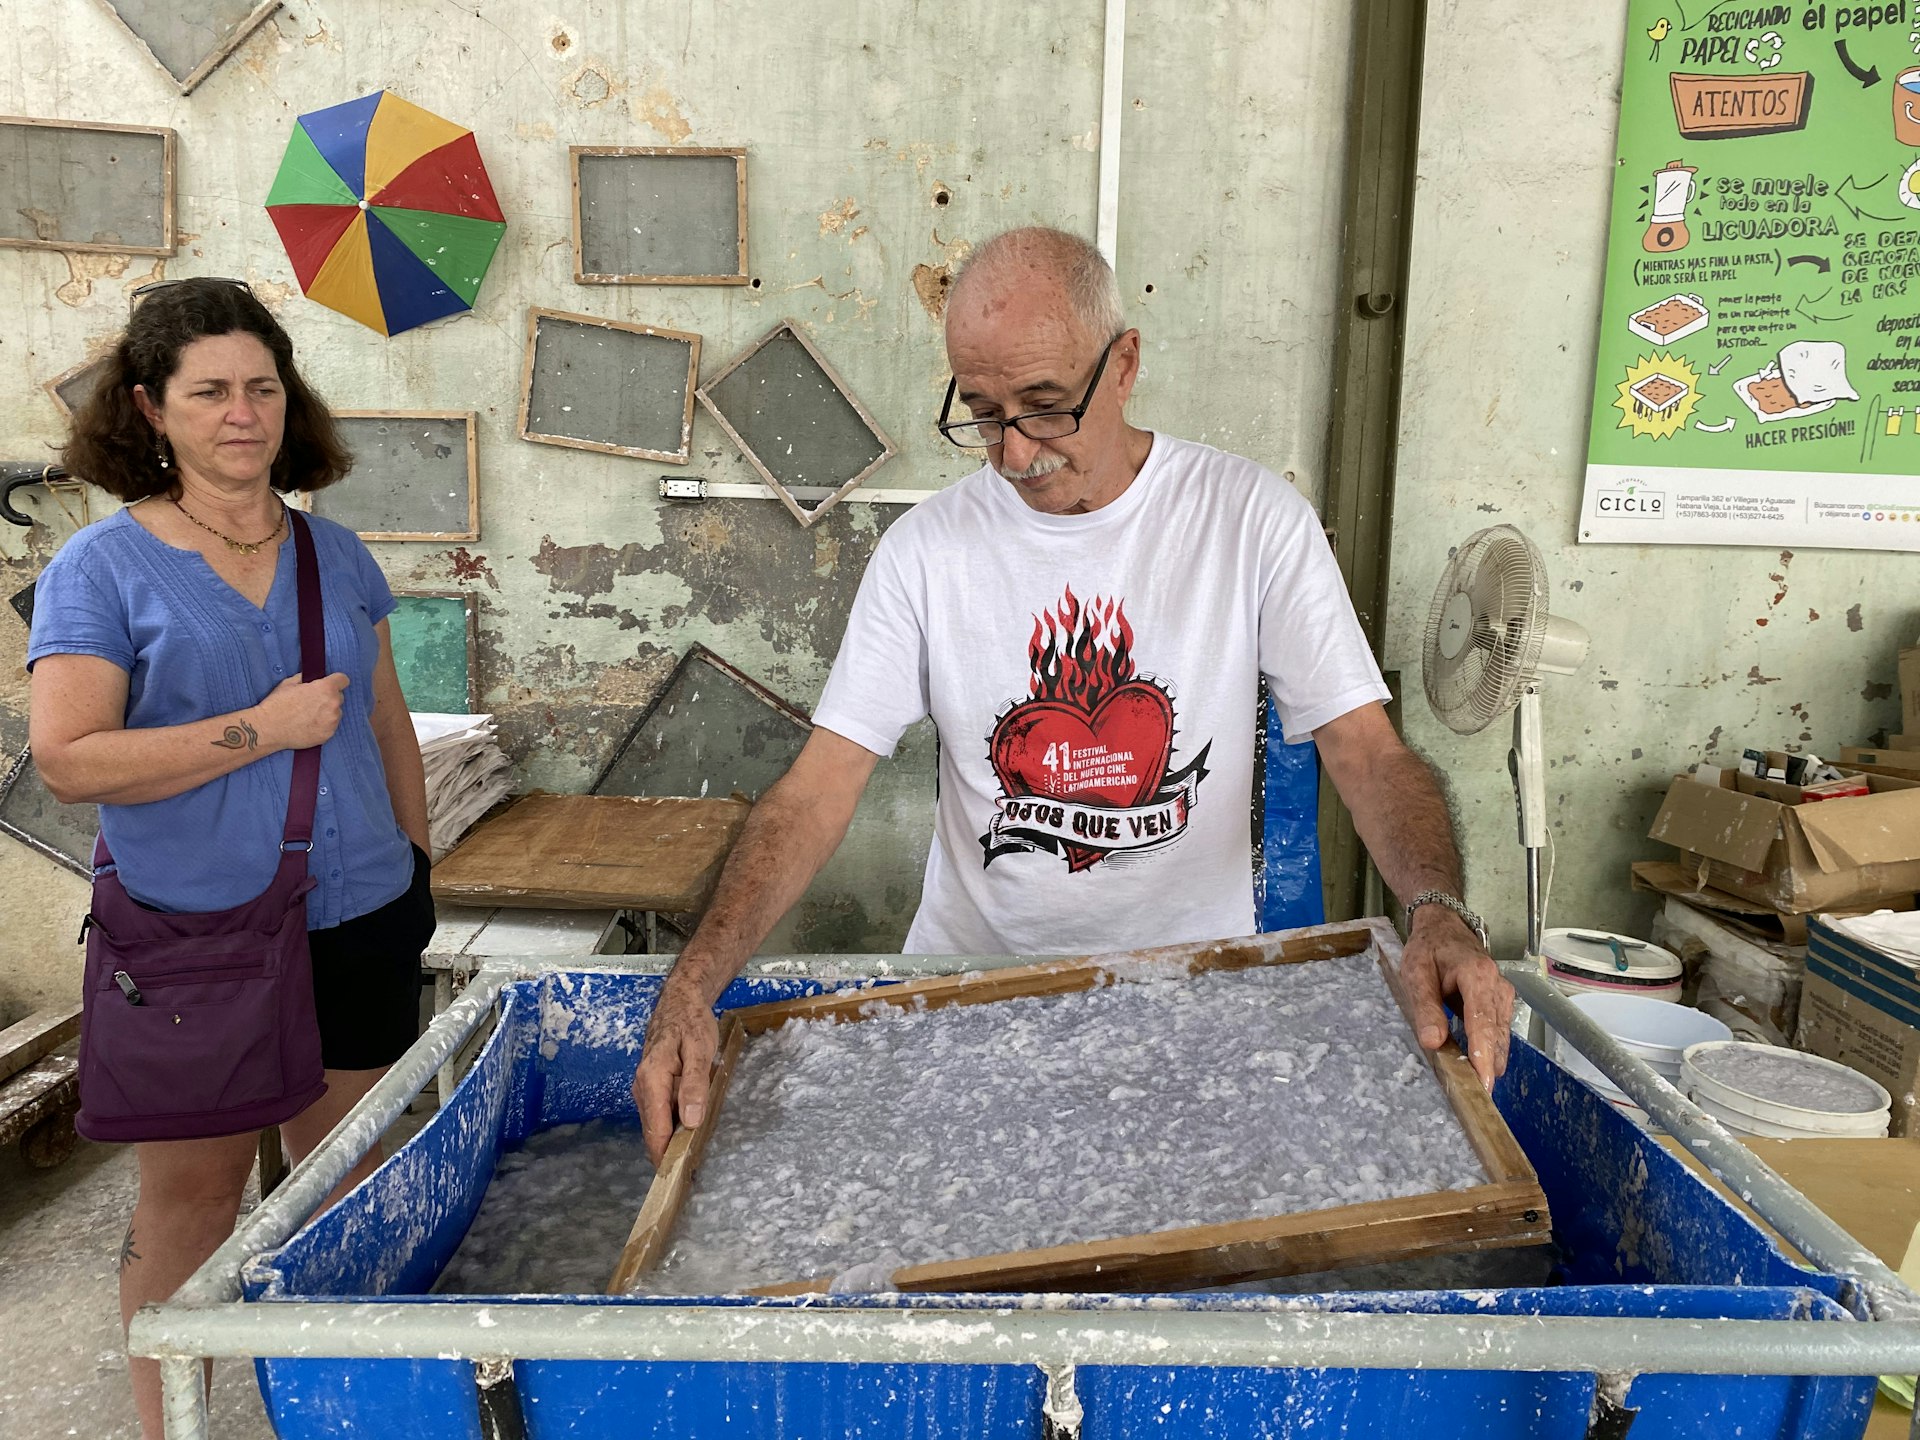 A man holding a mesh frame stands at a vat of pulp demonstrating the paper-making process to a nearby tourist